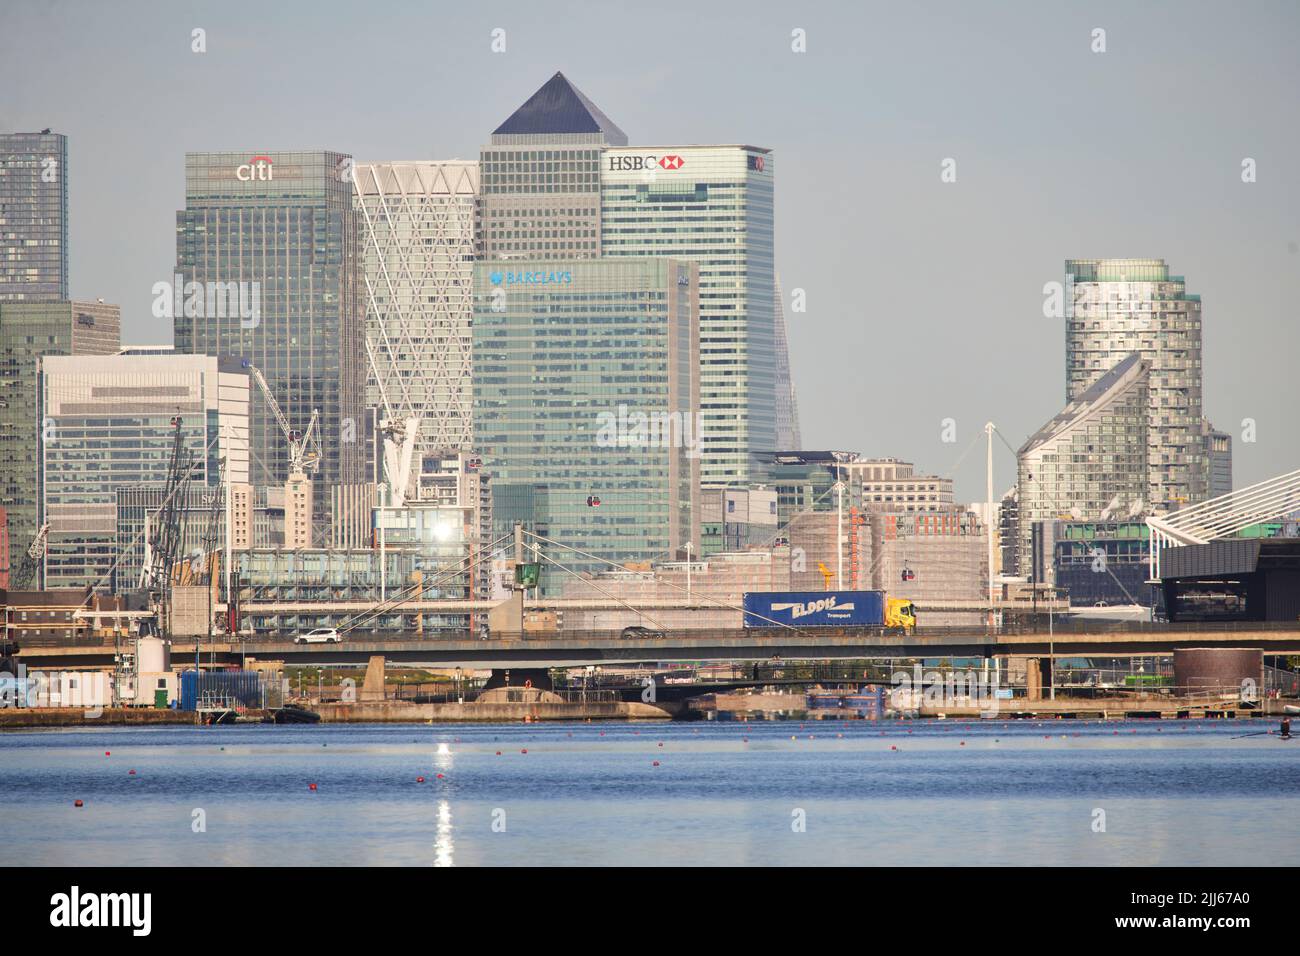 London Royal Albert Dock in Docklands area looking towards the business skyline of Canary Wharf Stock Photo